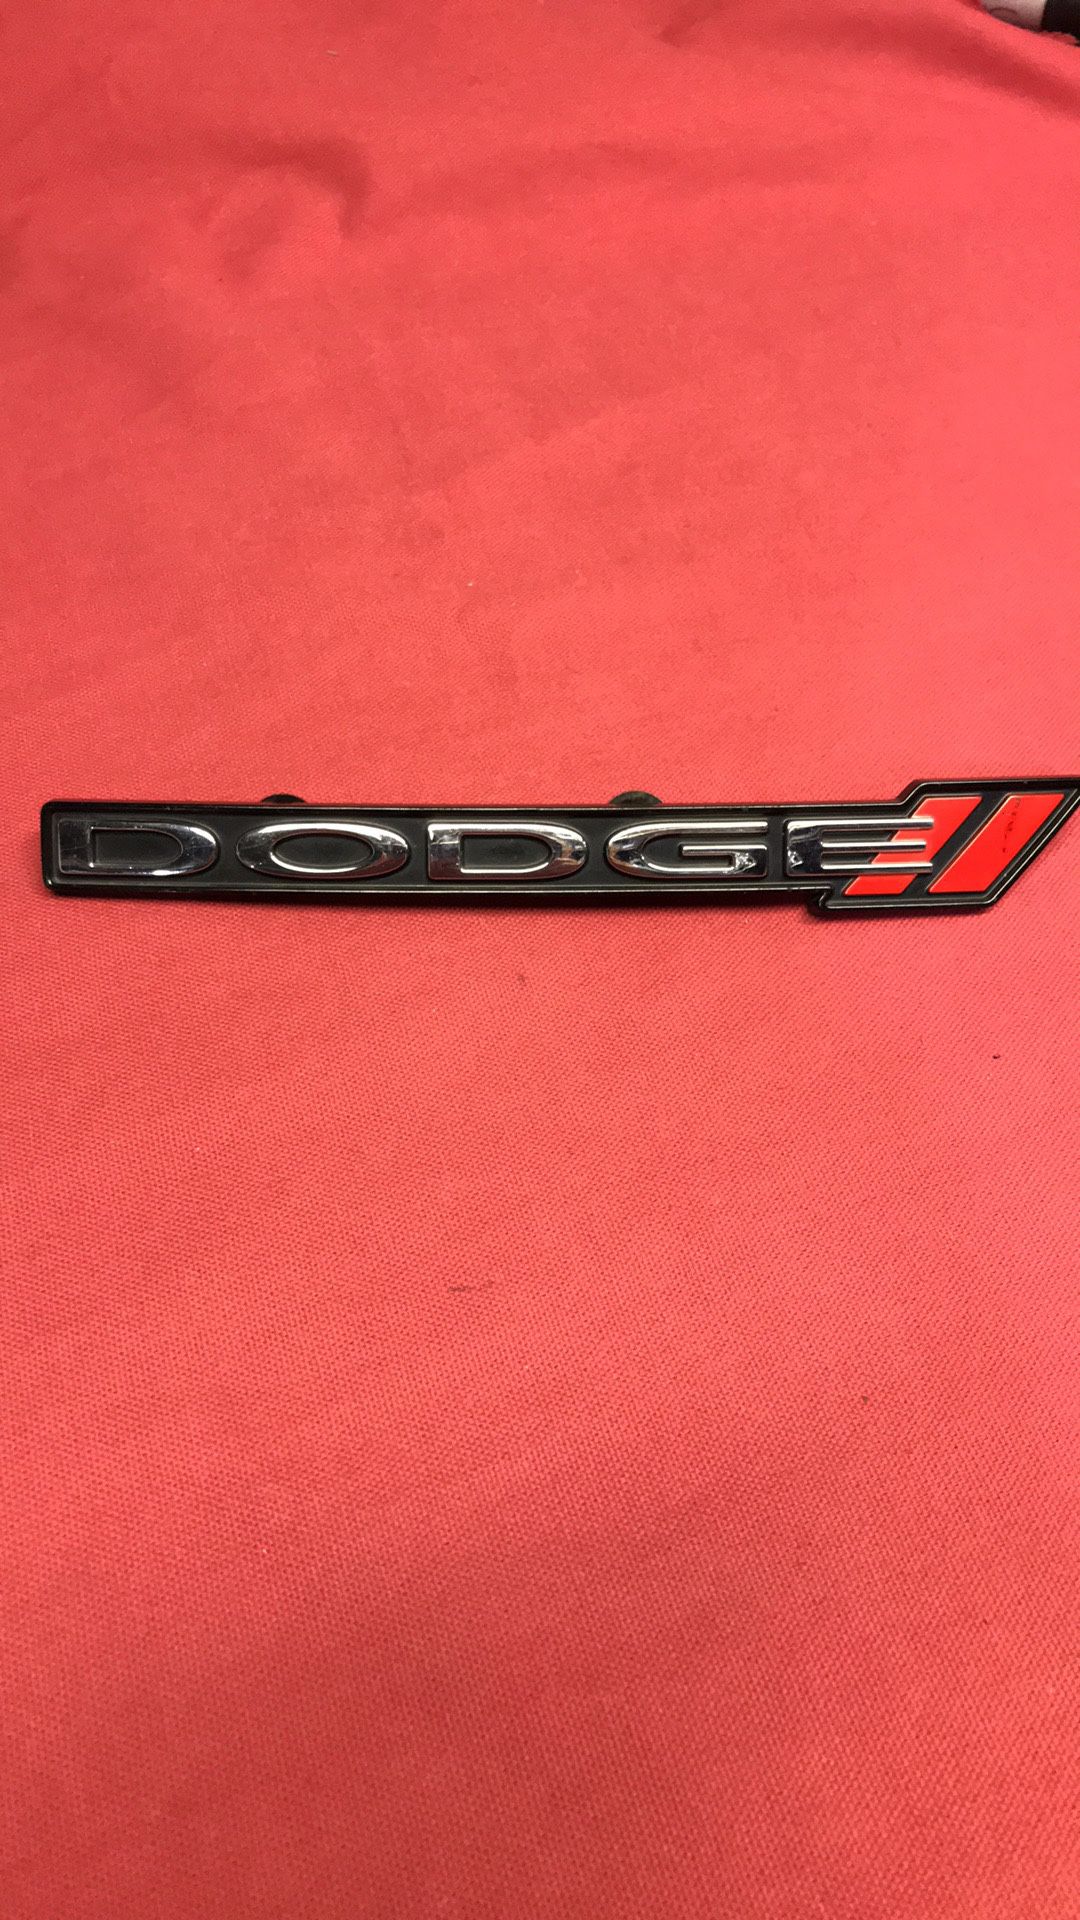 8” DODGE RED SLASHES FRONT GRILL BADGE.